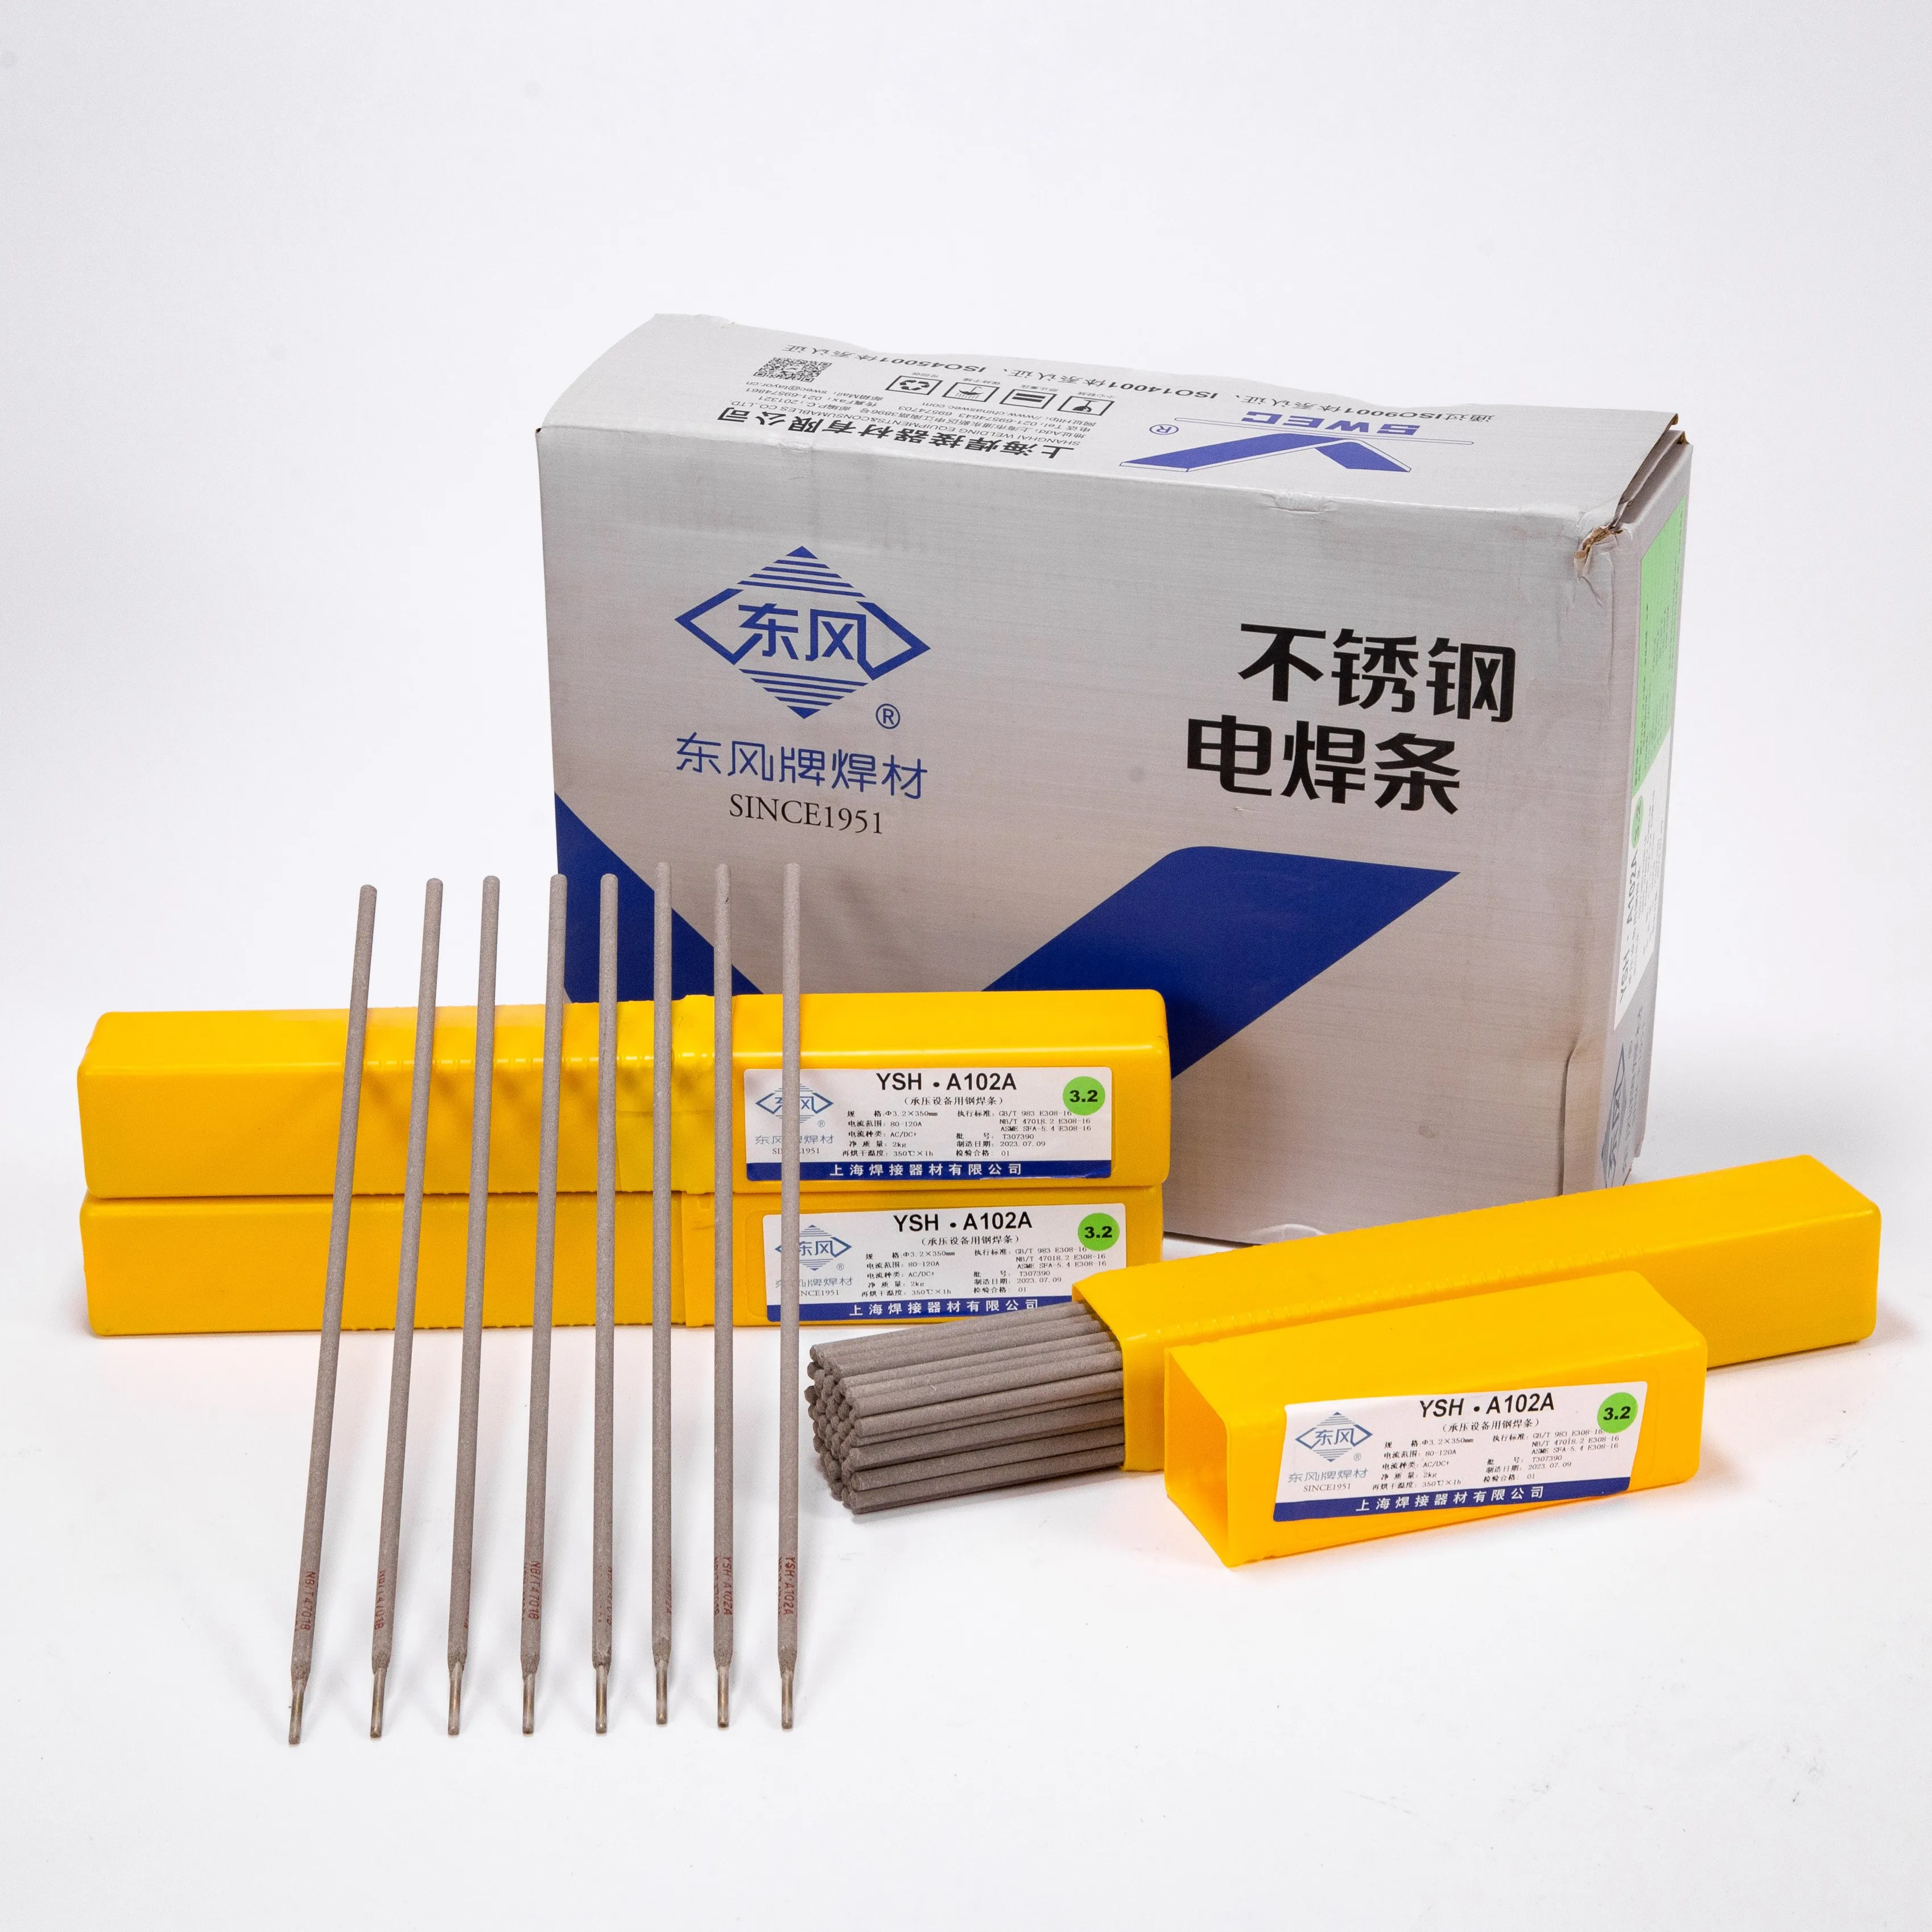 Dongfeng YSH.A102 E308-16 China Low Carbon 316 Stainless Steel Welding Stick Electrode Rods